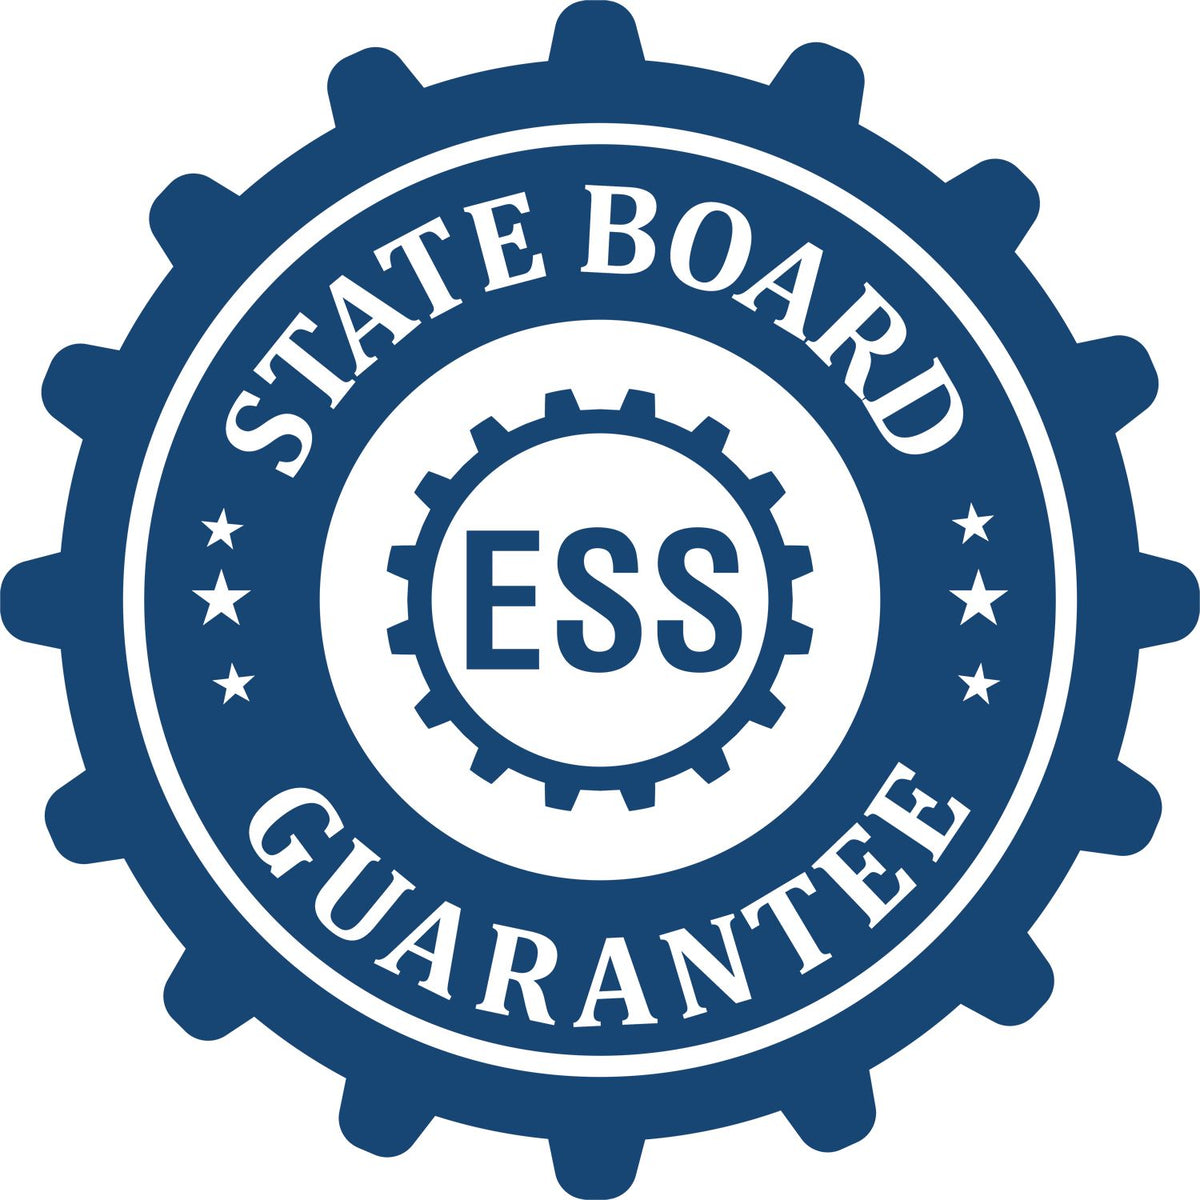 An emblem in a gear shape illustrating a state board guarantee for the South Carolina Landscape Architectural Seal Stamp product.